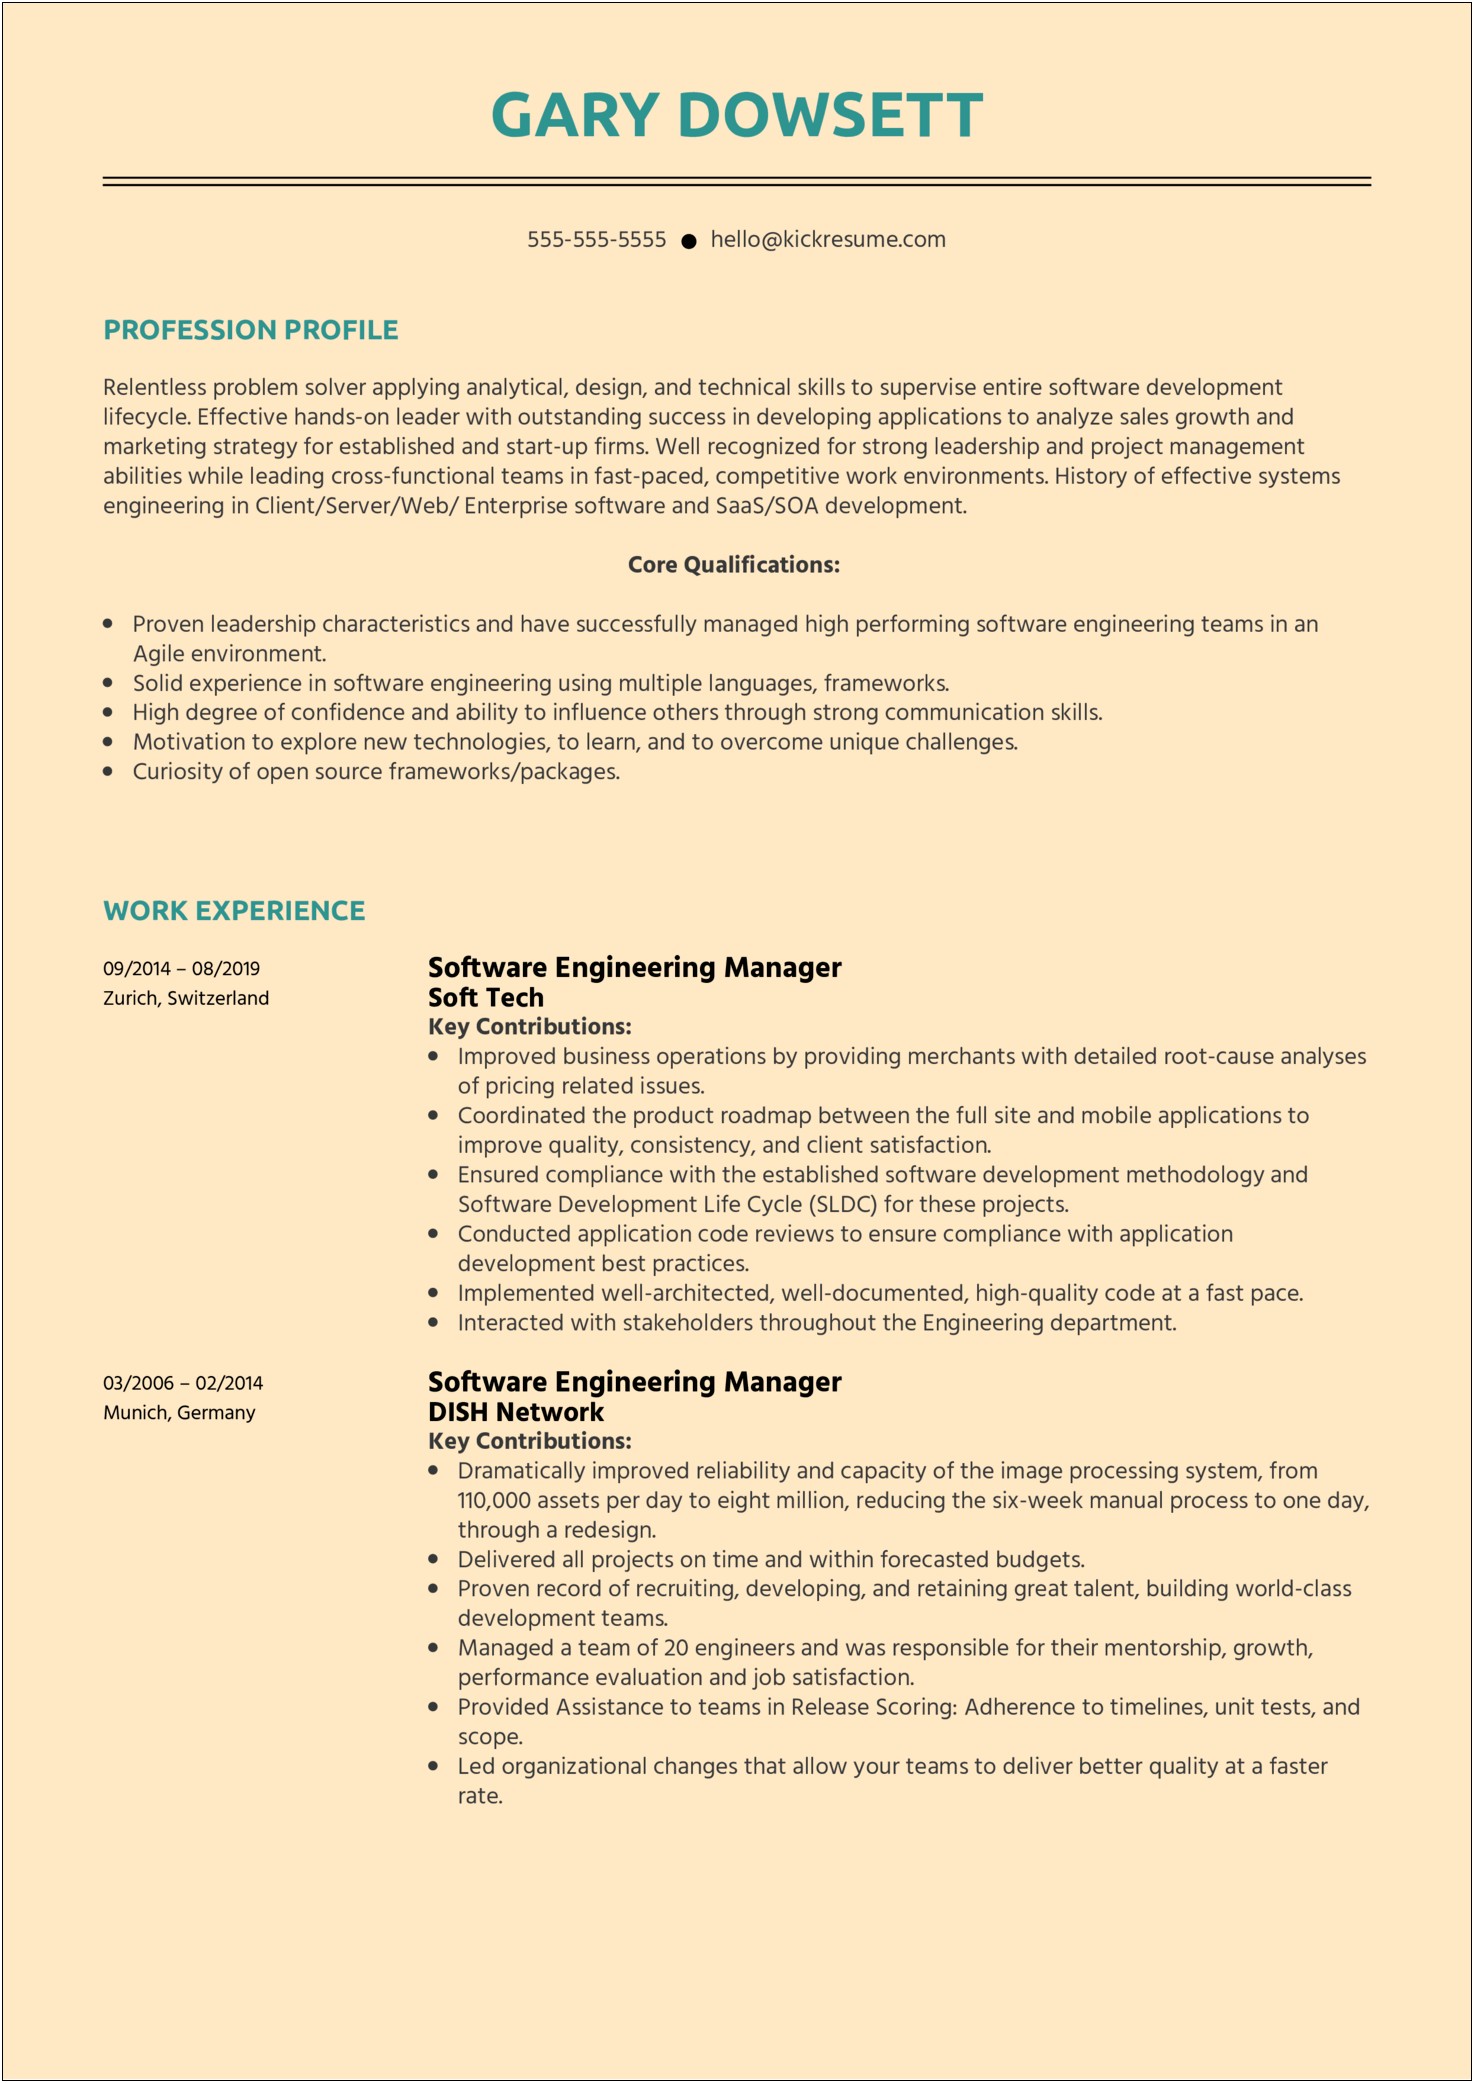 Sample Resume Objectives For Engineers